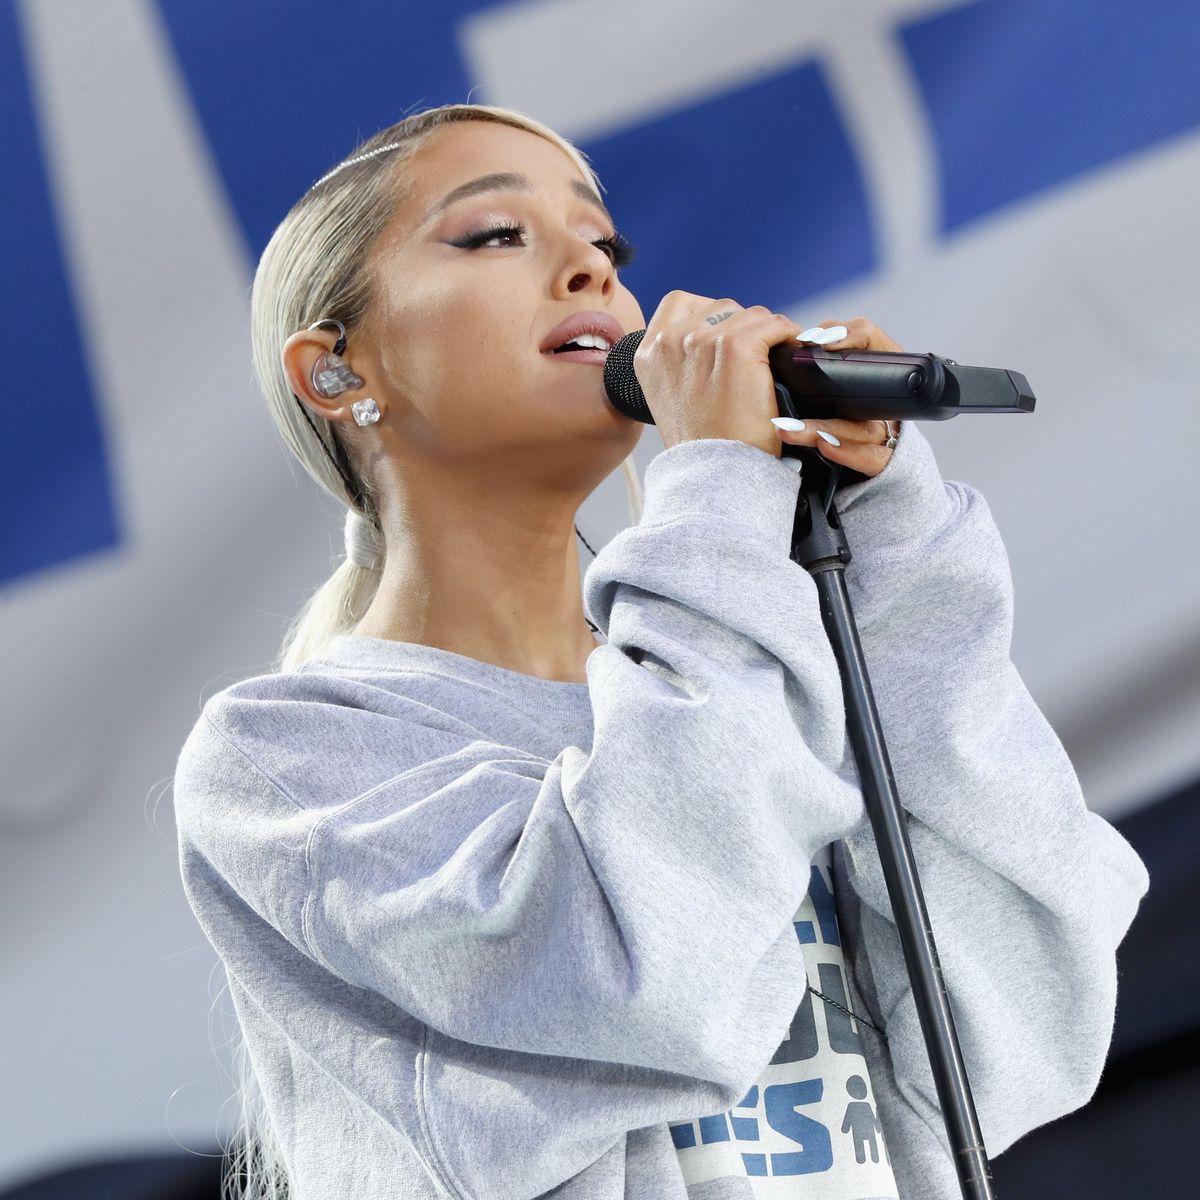 Ariana Grande Canceled 'SNL' Appearance for 